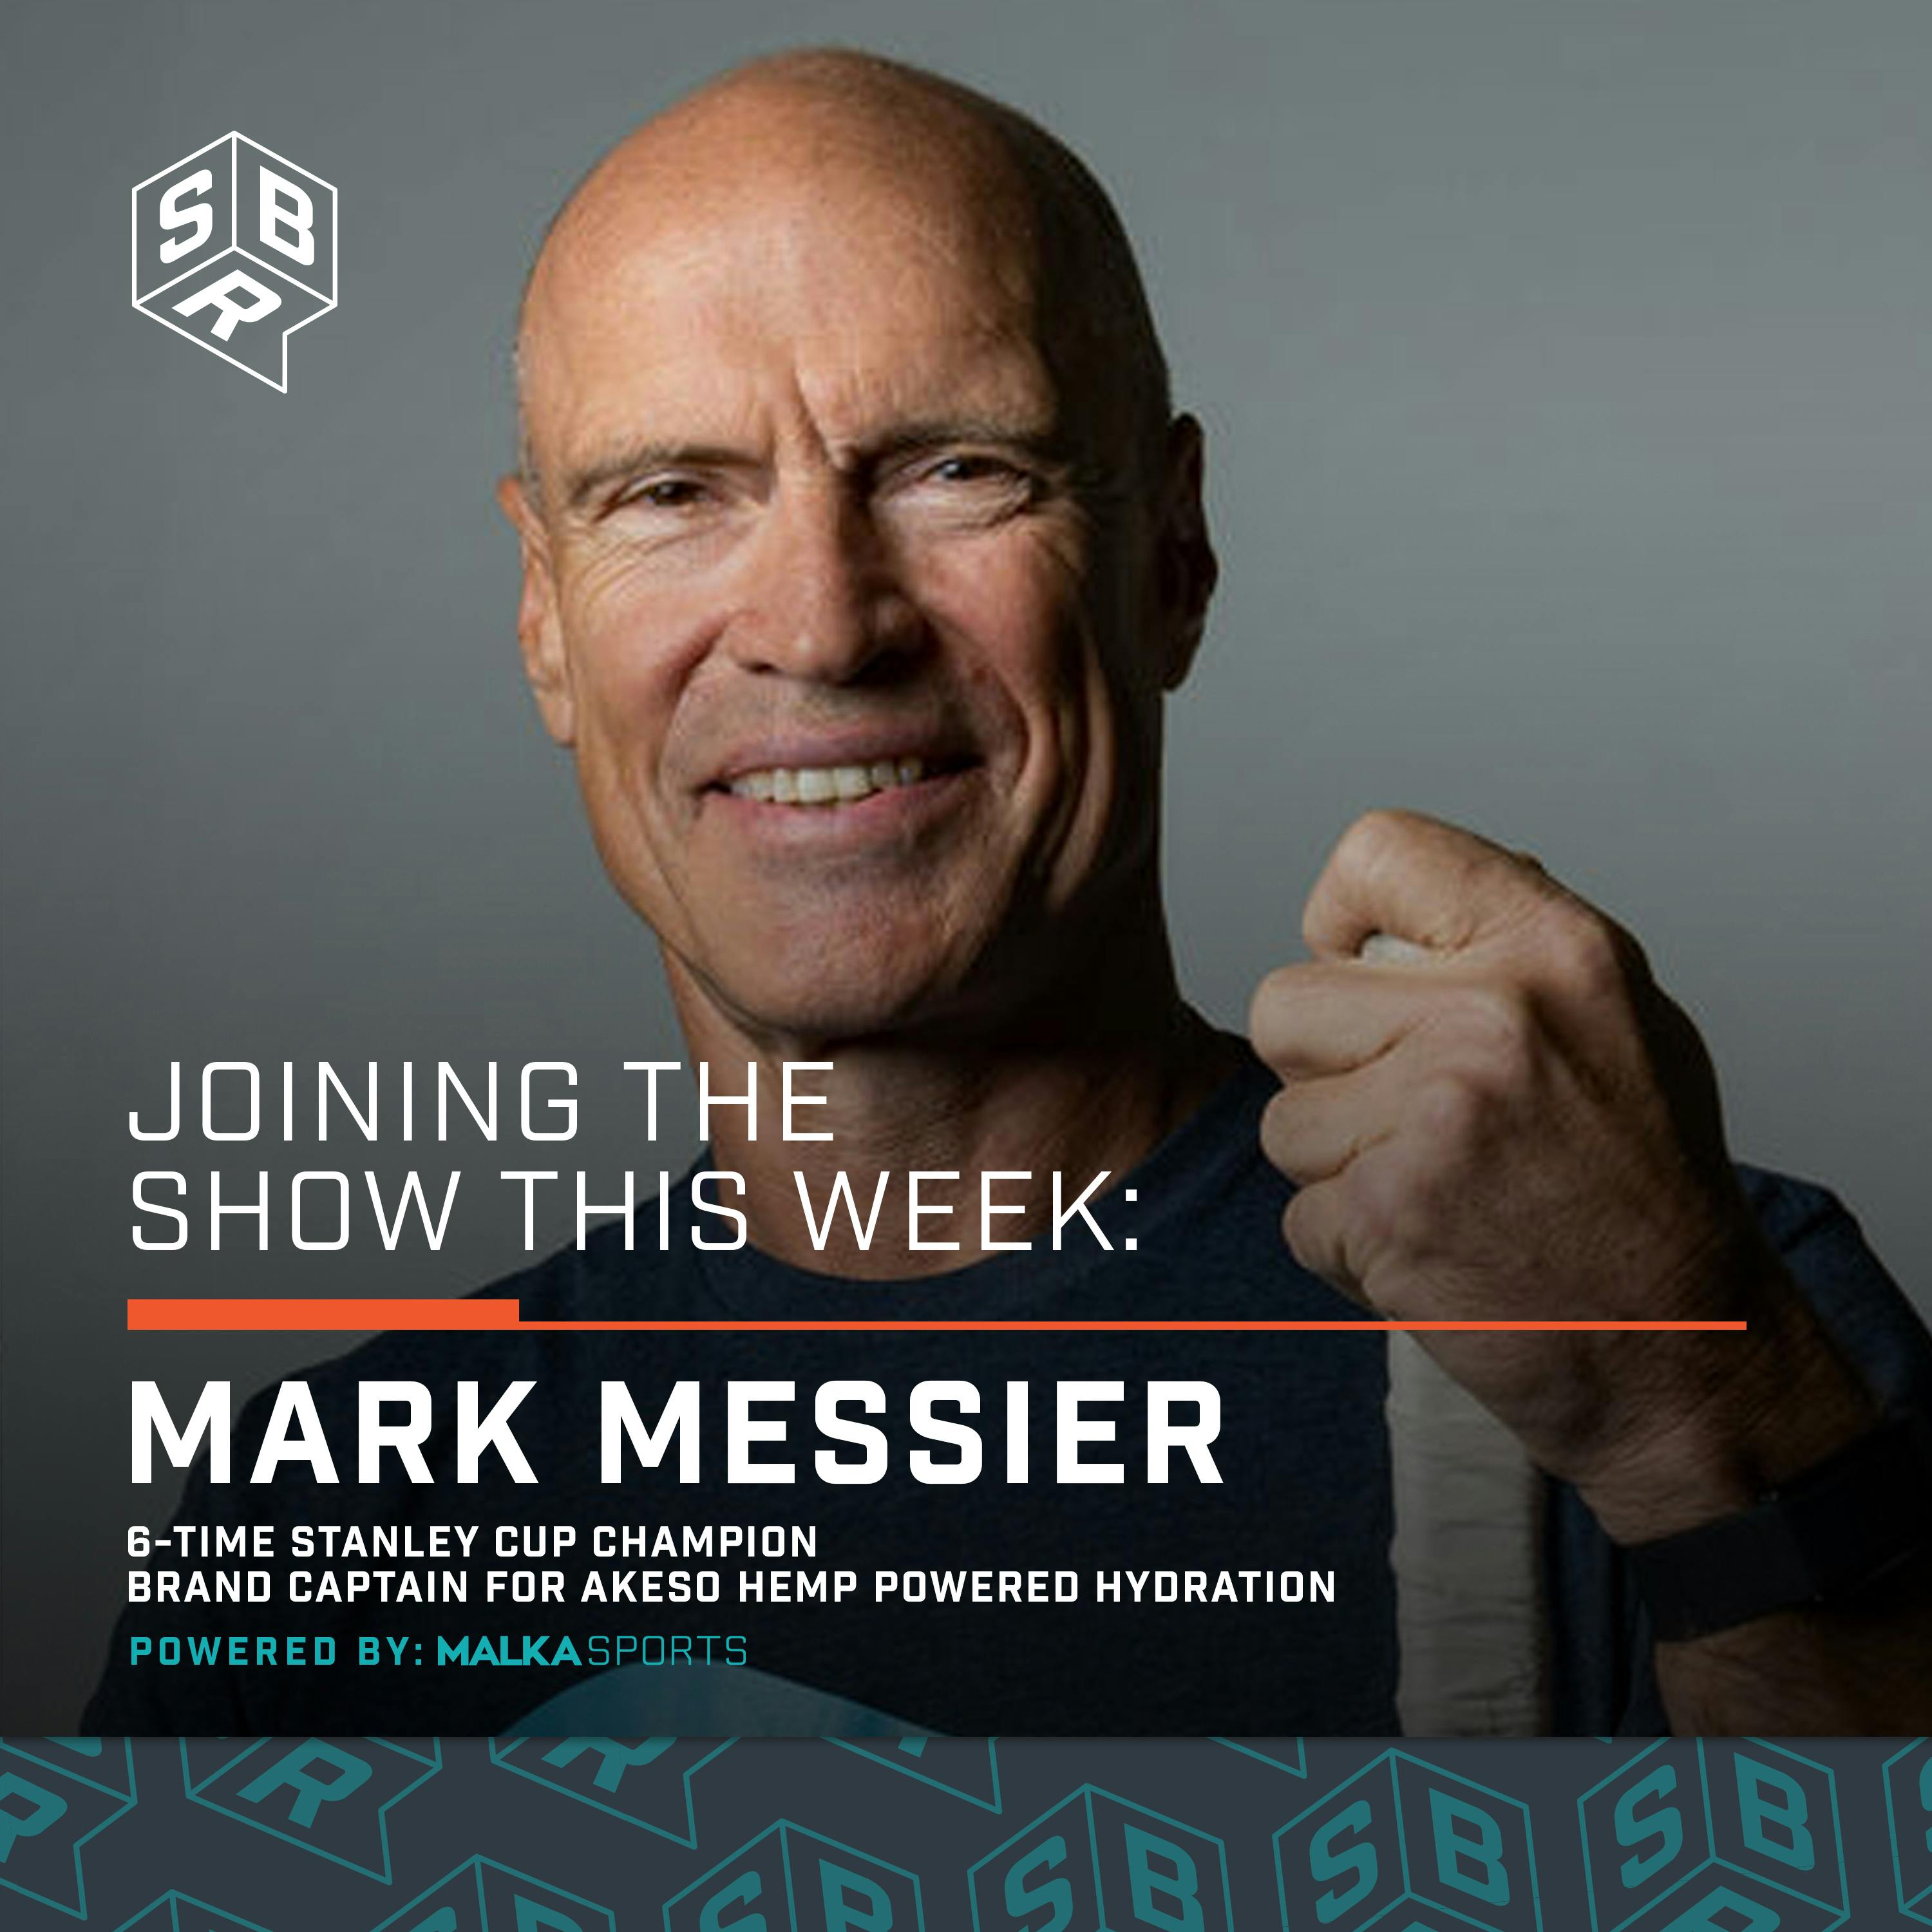 Mark Messier - Hockey Hall of Famer & 6-Time Stanley Cup champion